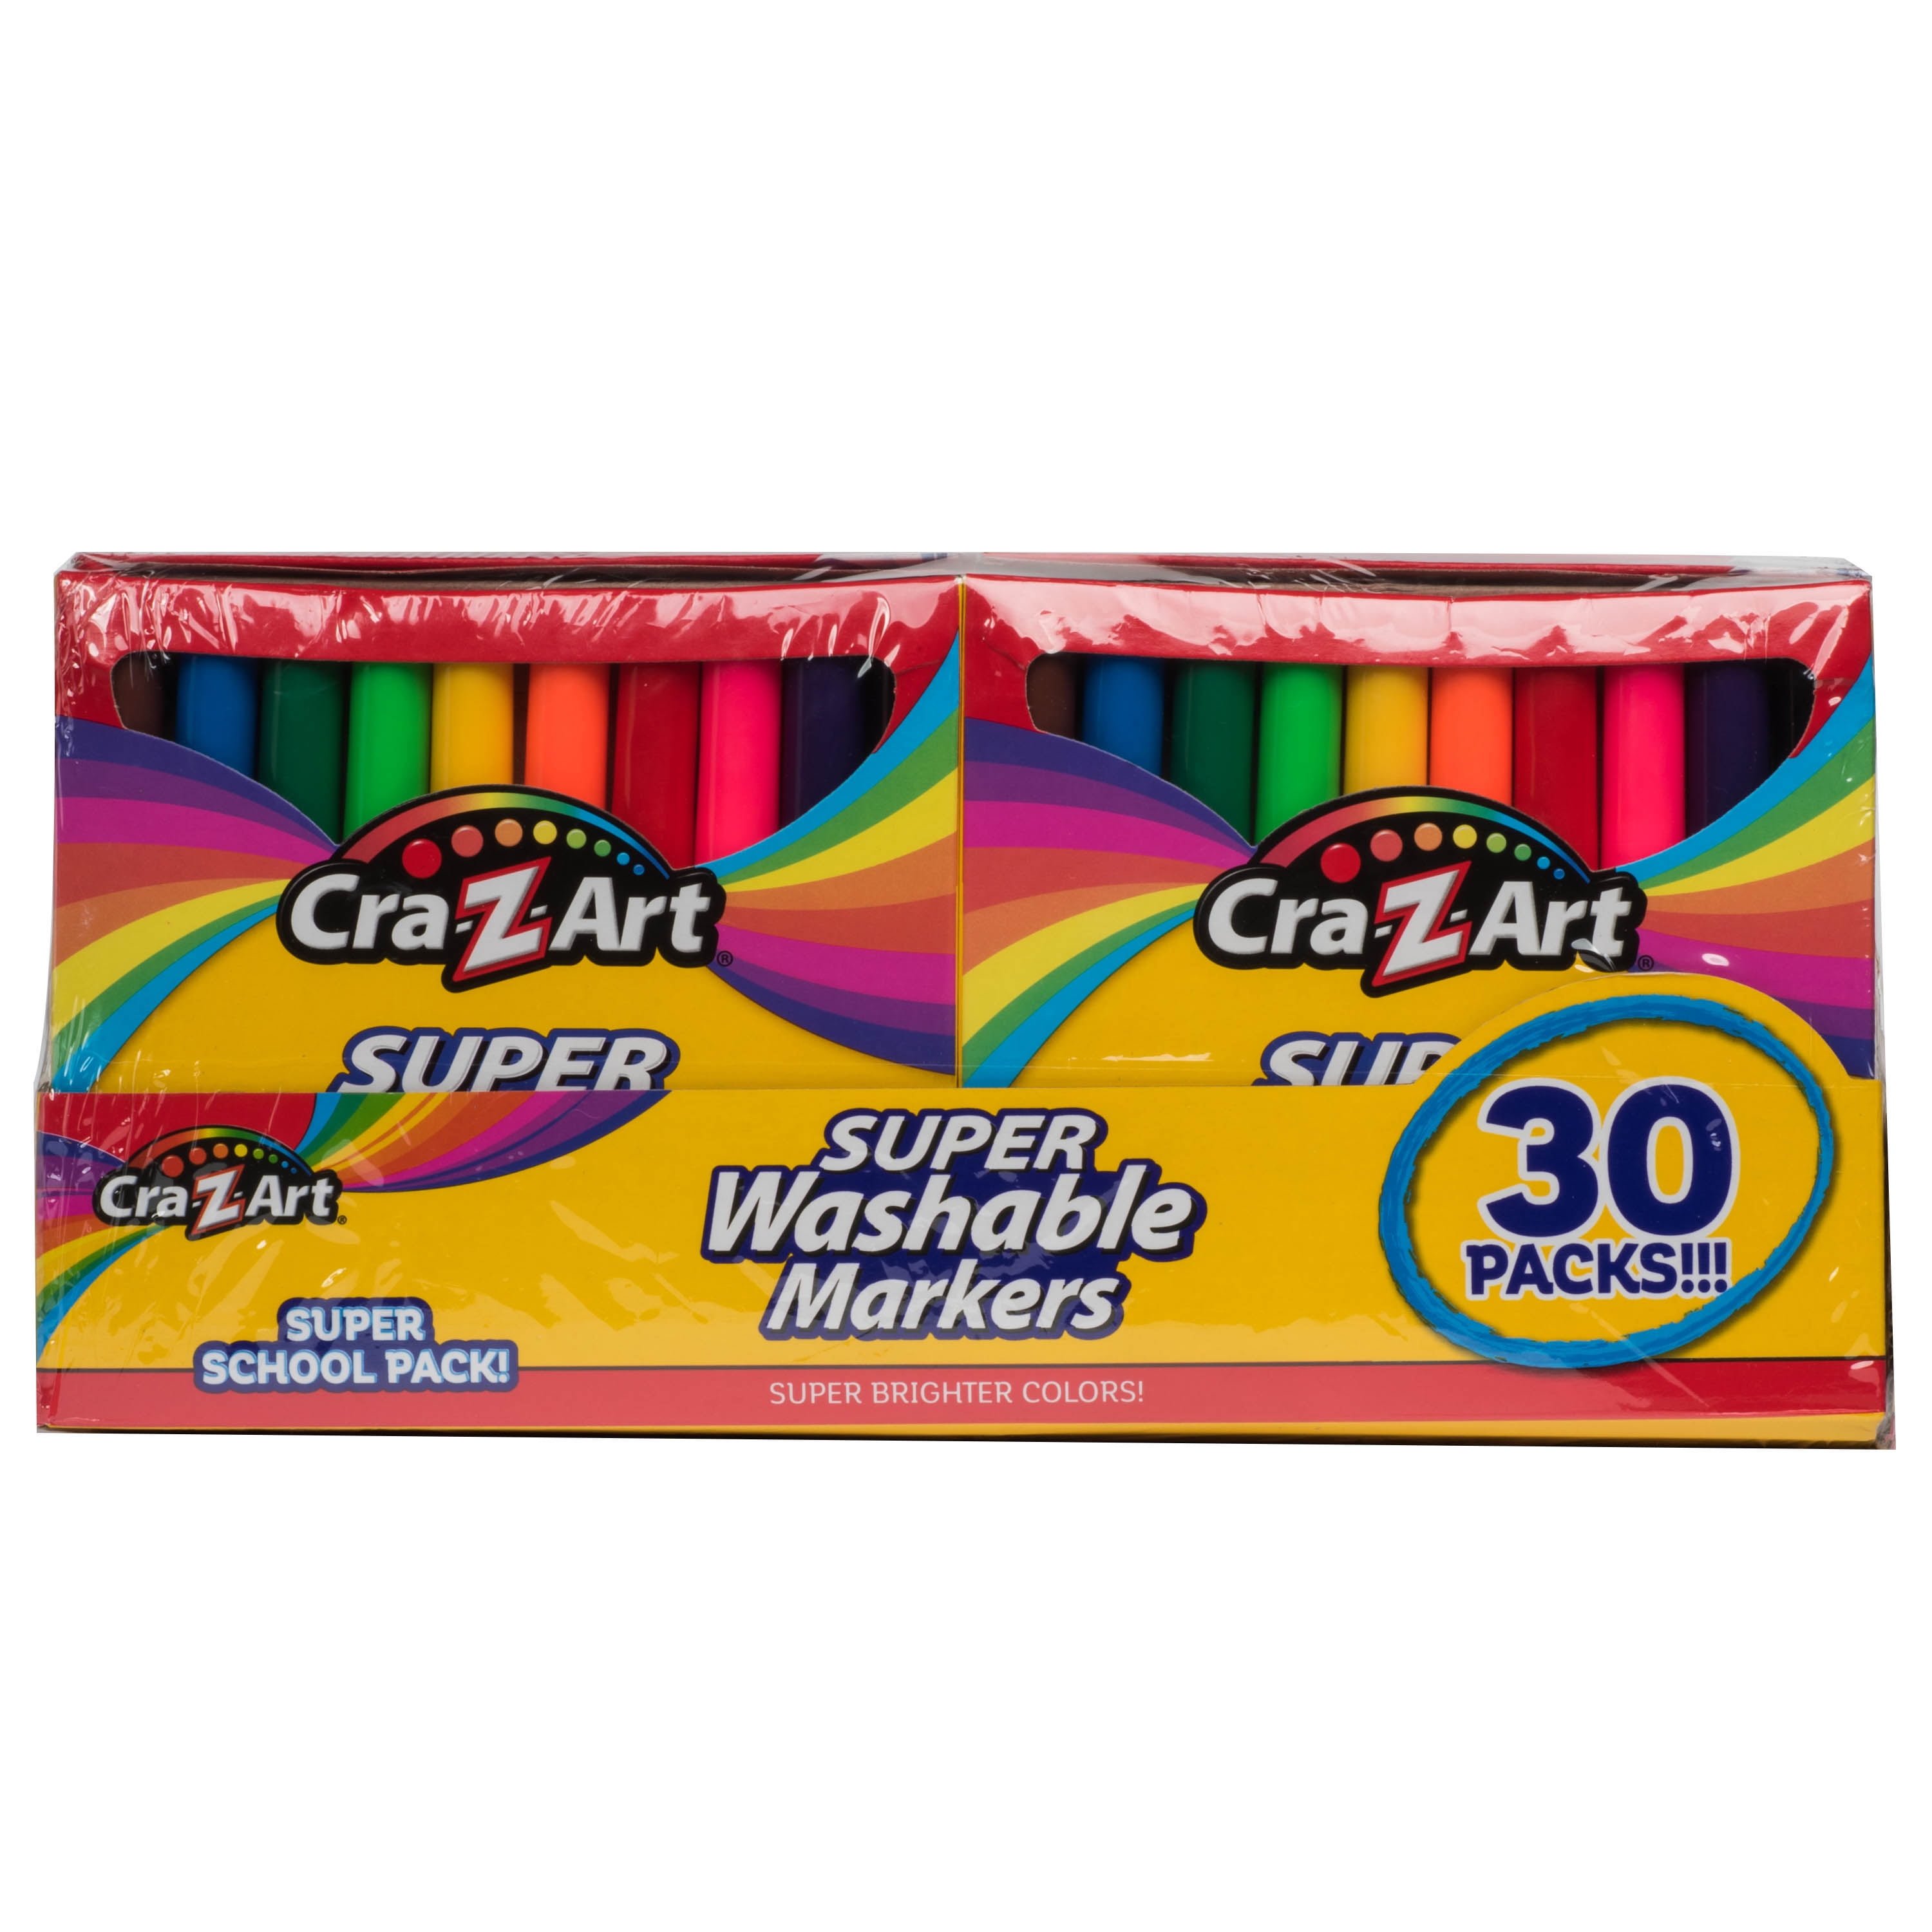 Cra-z-art Super Washable Markers, 10 Count X 2 Packs -  Denmark